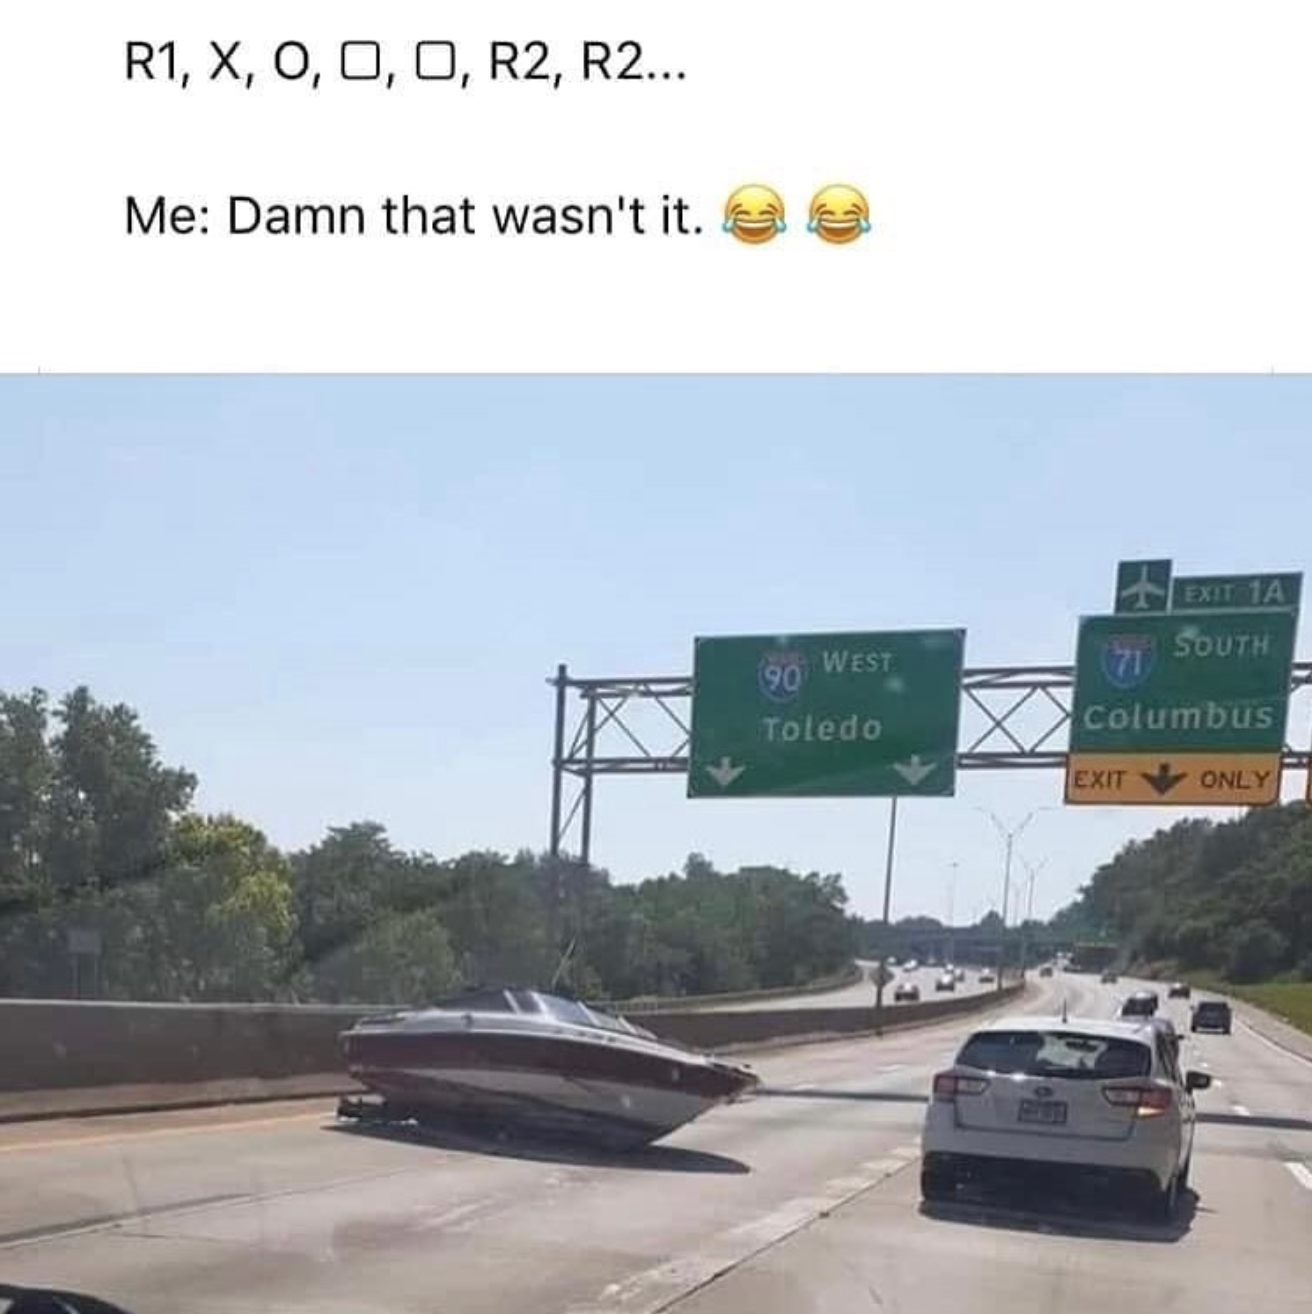 funny gaming memes - R1, X, 0, 0, 0, R2, R2... Me Damn that wasn't it. 90 West Exit Ta South Columbus Exit Only Toledo